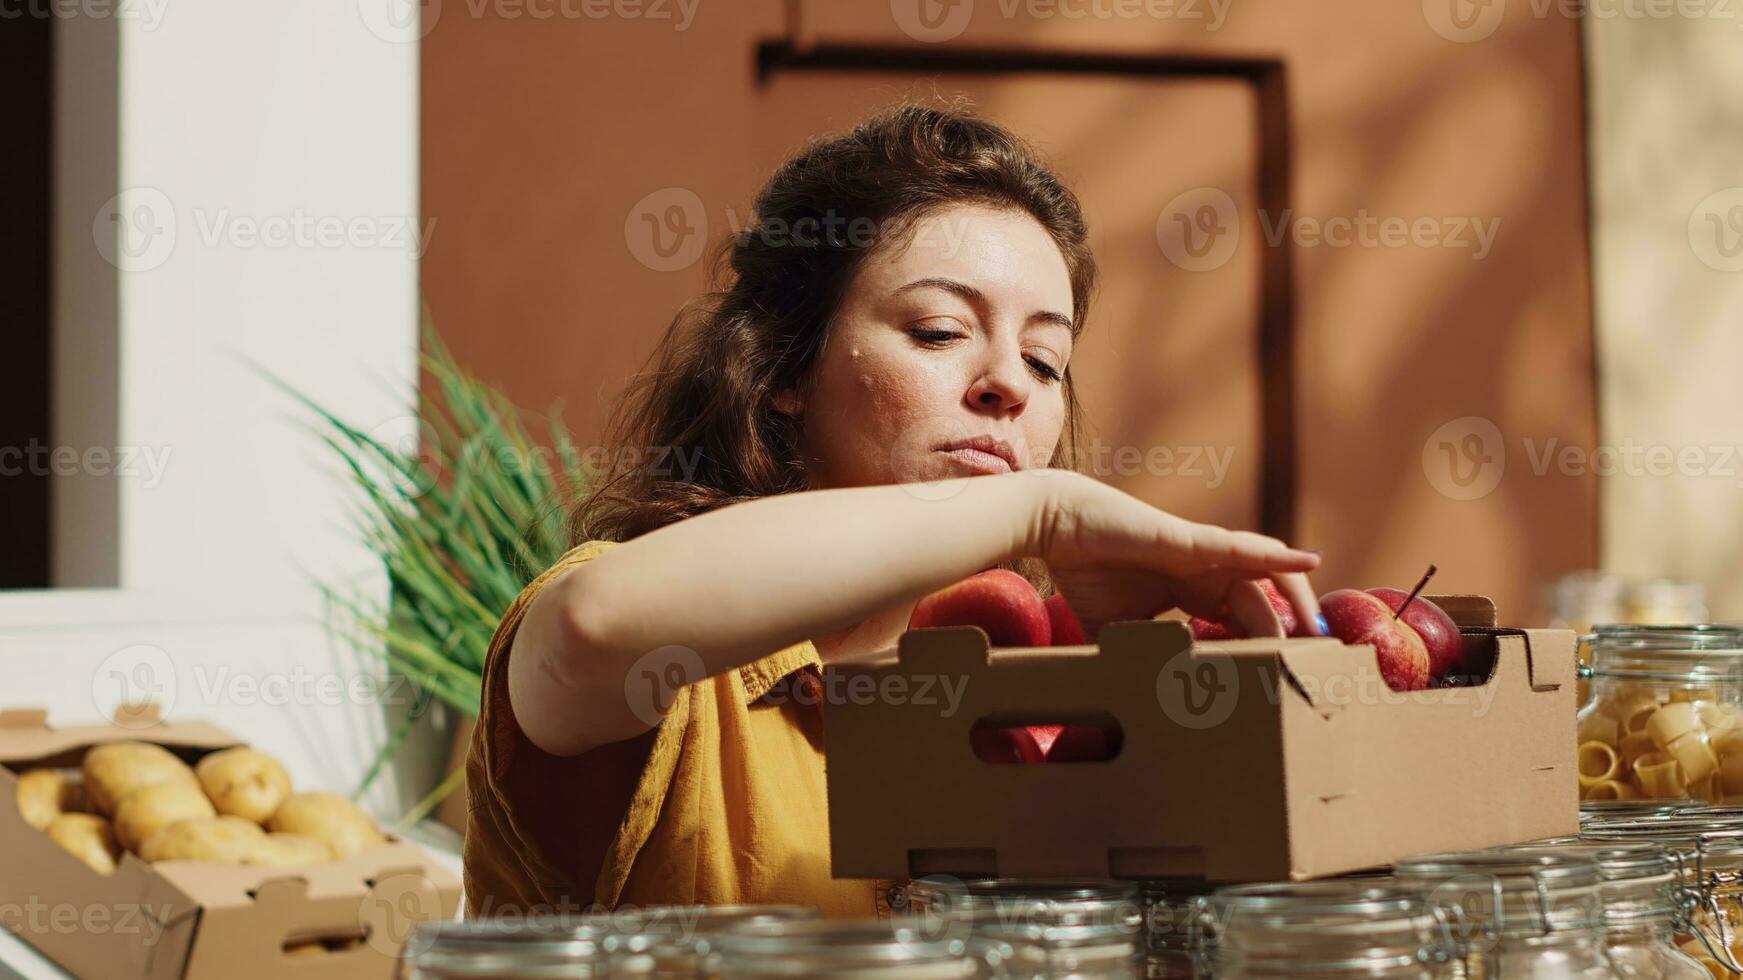 Vegan woman in sustainable zero waste supermarket smelling apples before adding them to shopping basket. Client in local neighborhood grocery shop picking locally grown fruits photo